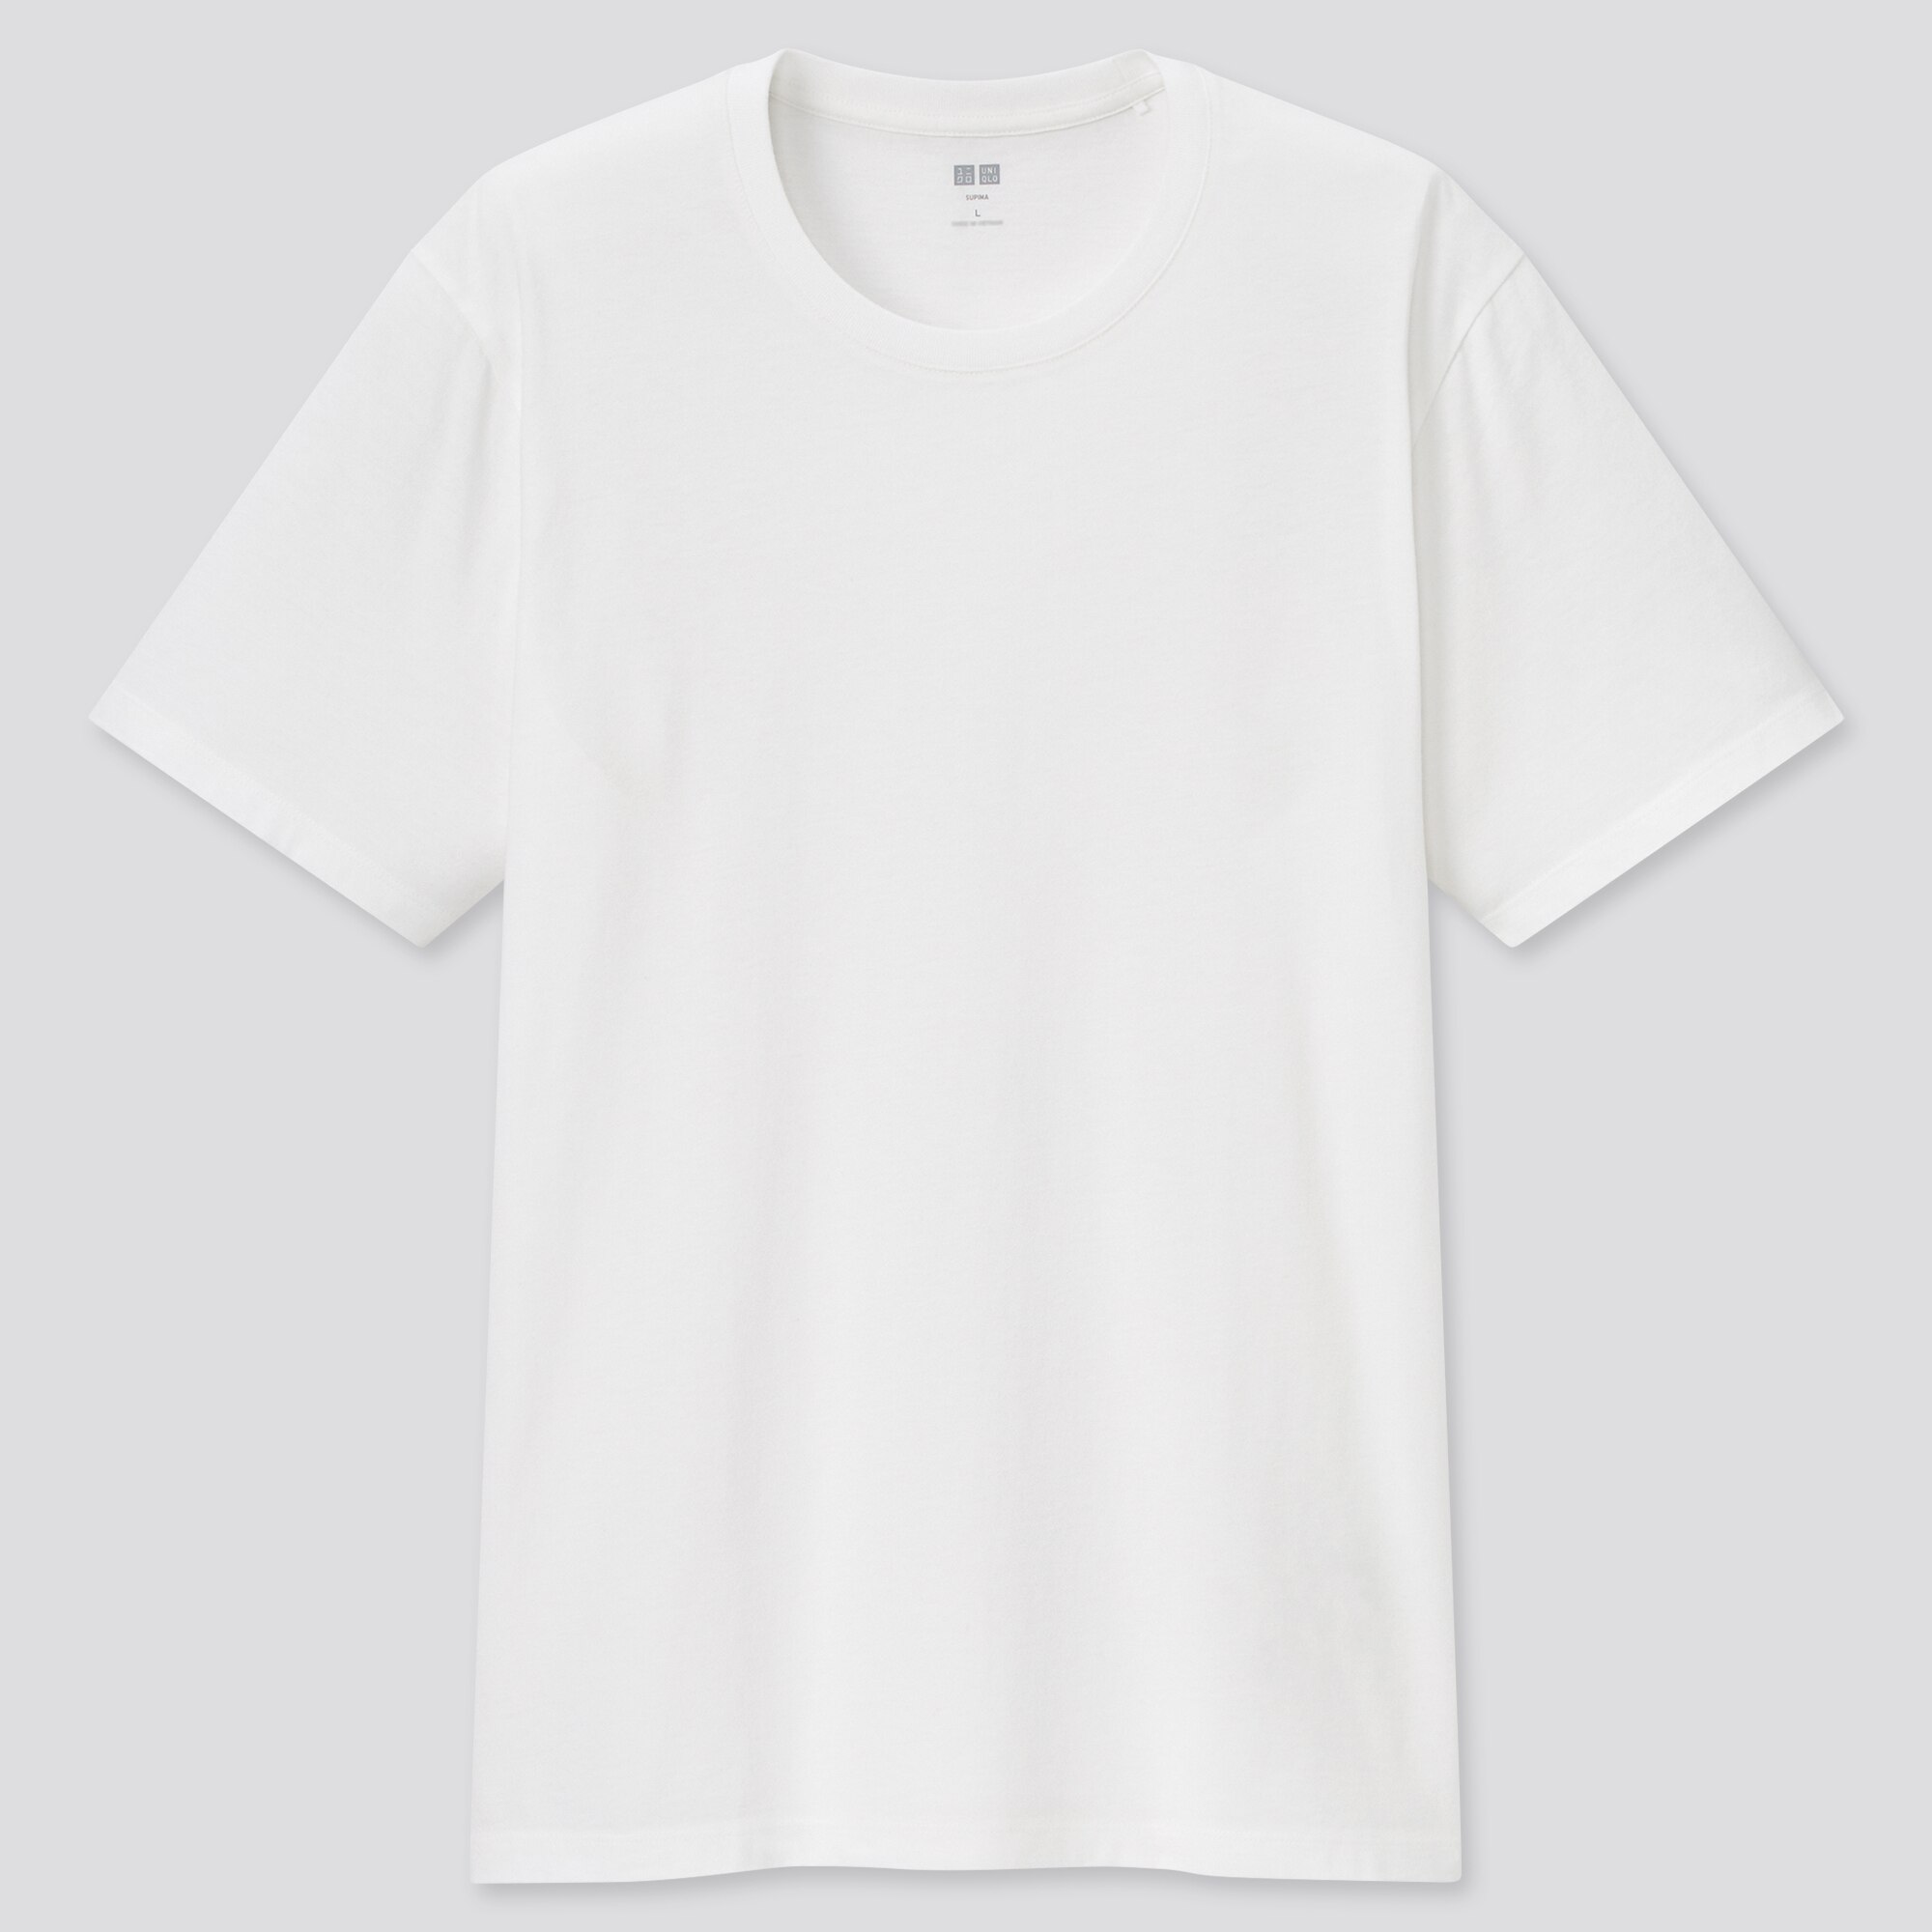 The Best White Cotton TShirt 2021  Reviewed by Typical Contents